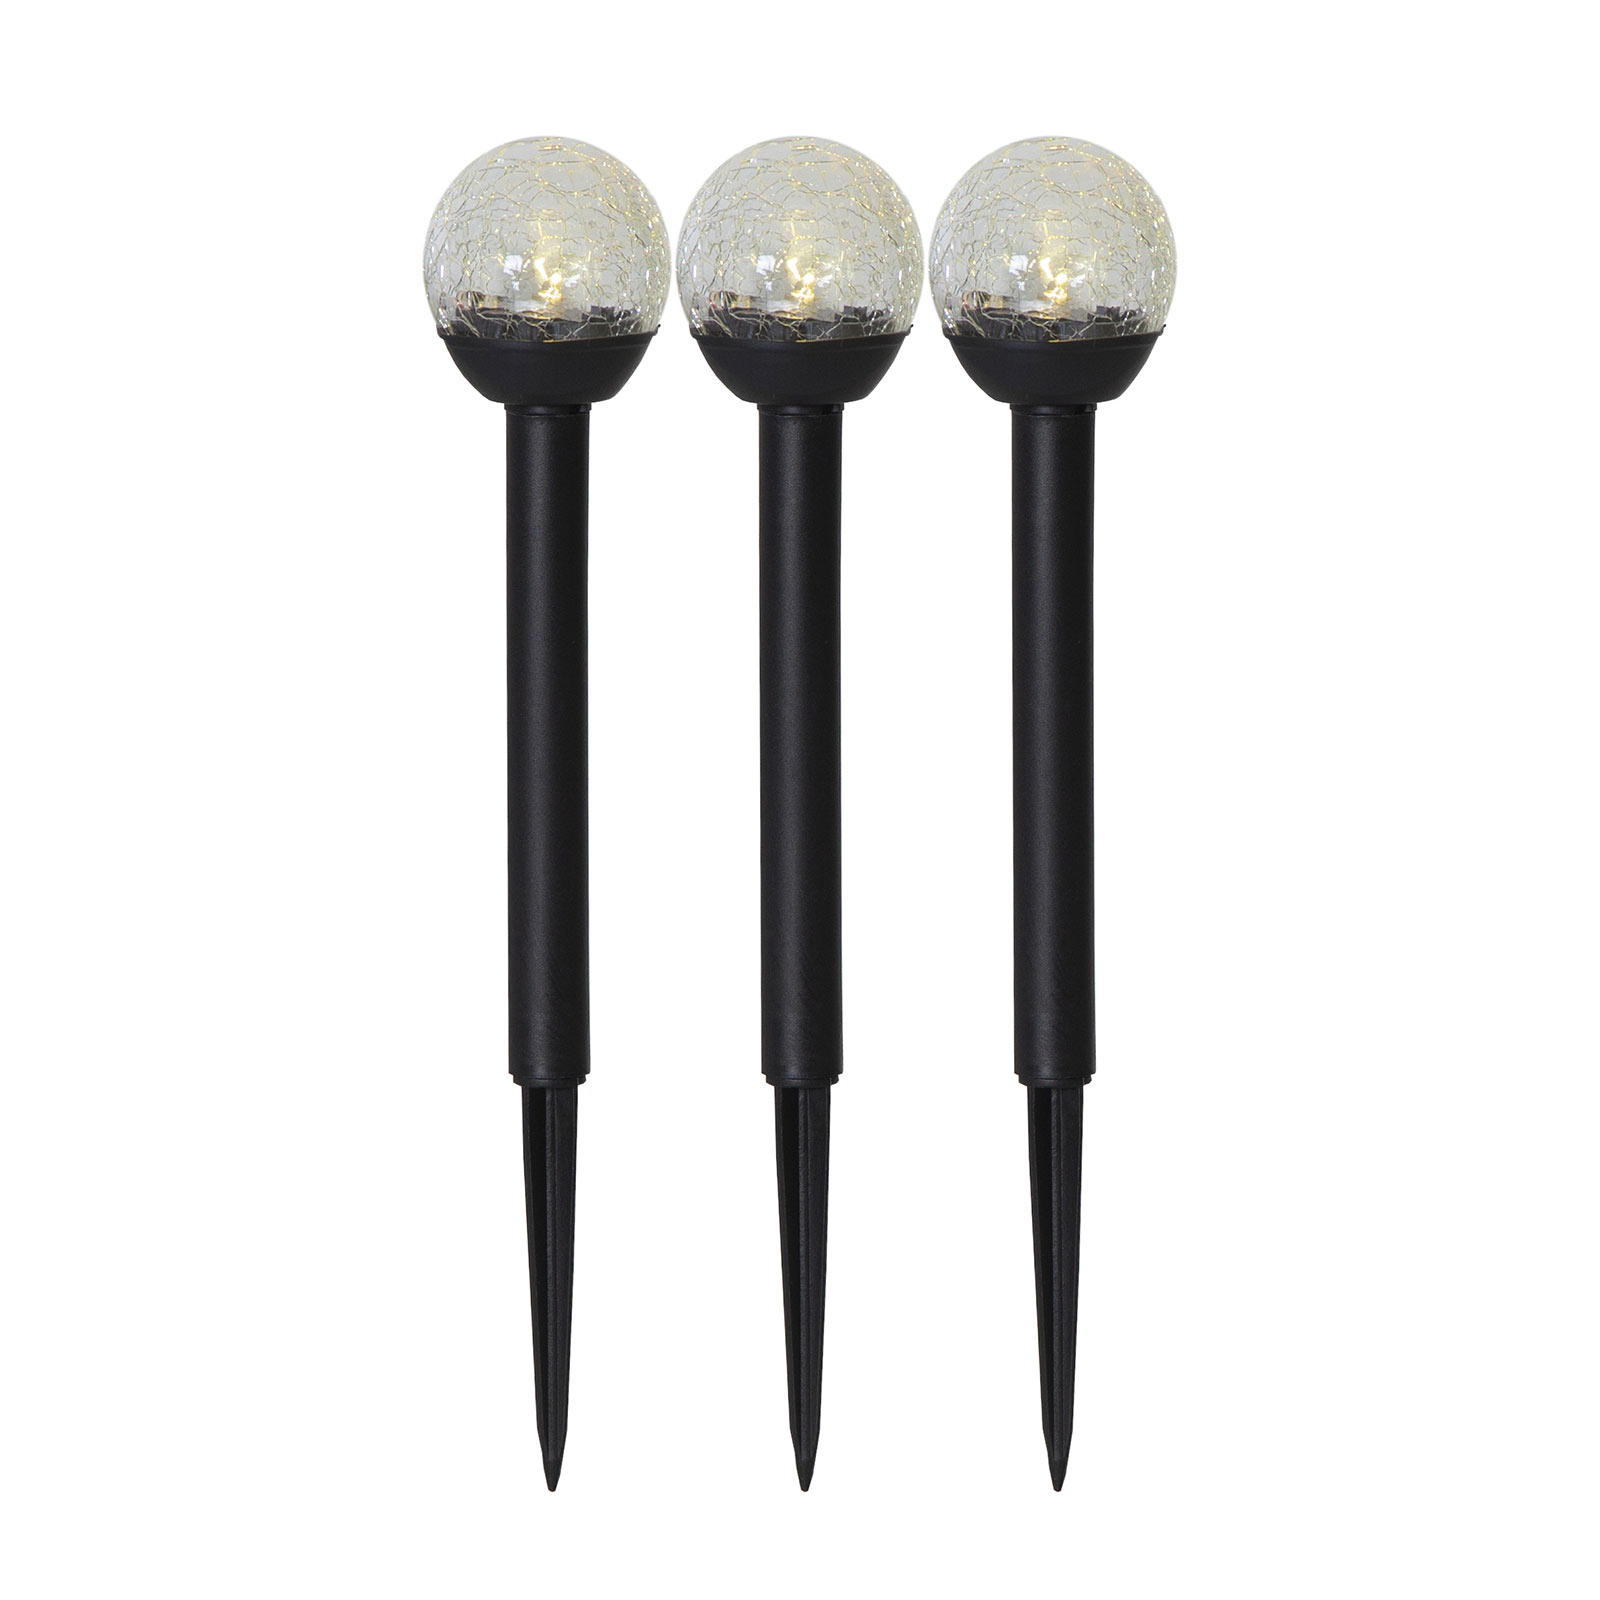 LED-solcellslampa Roma, 3-pack